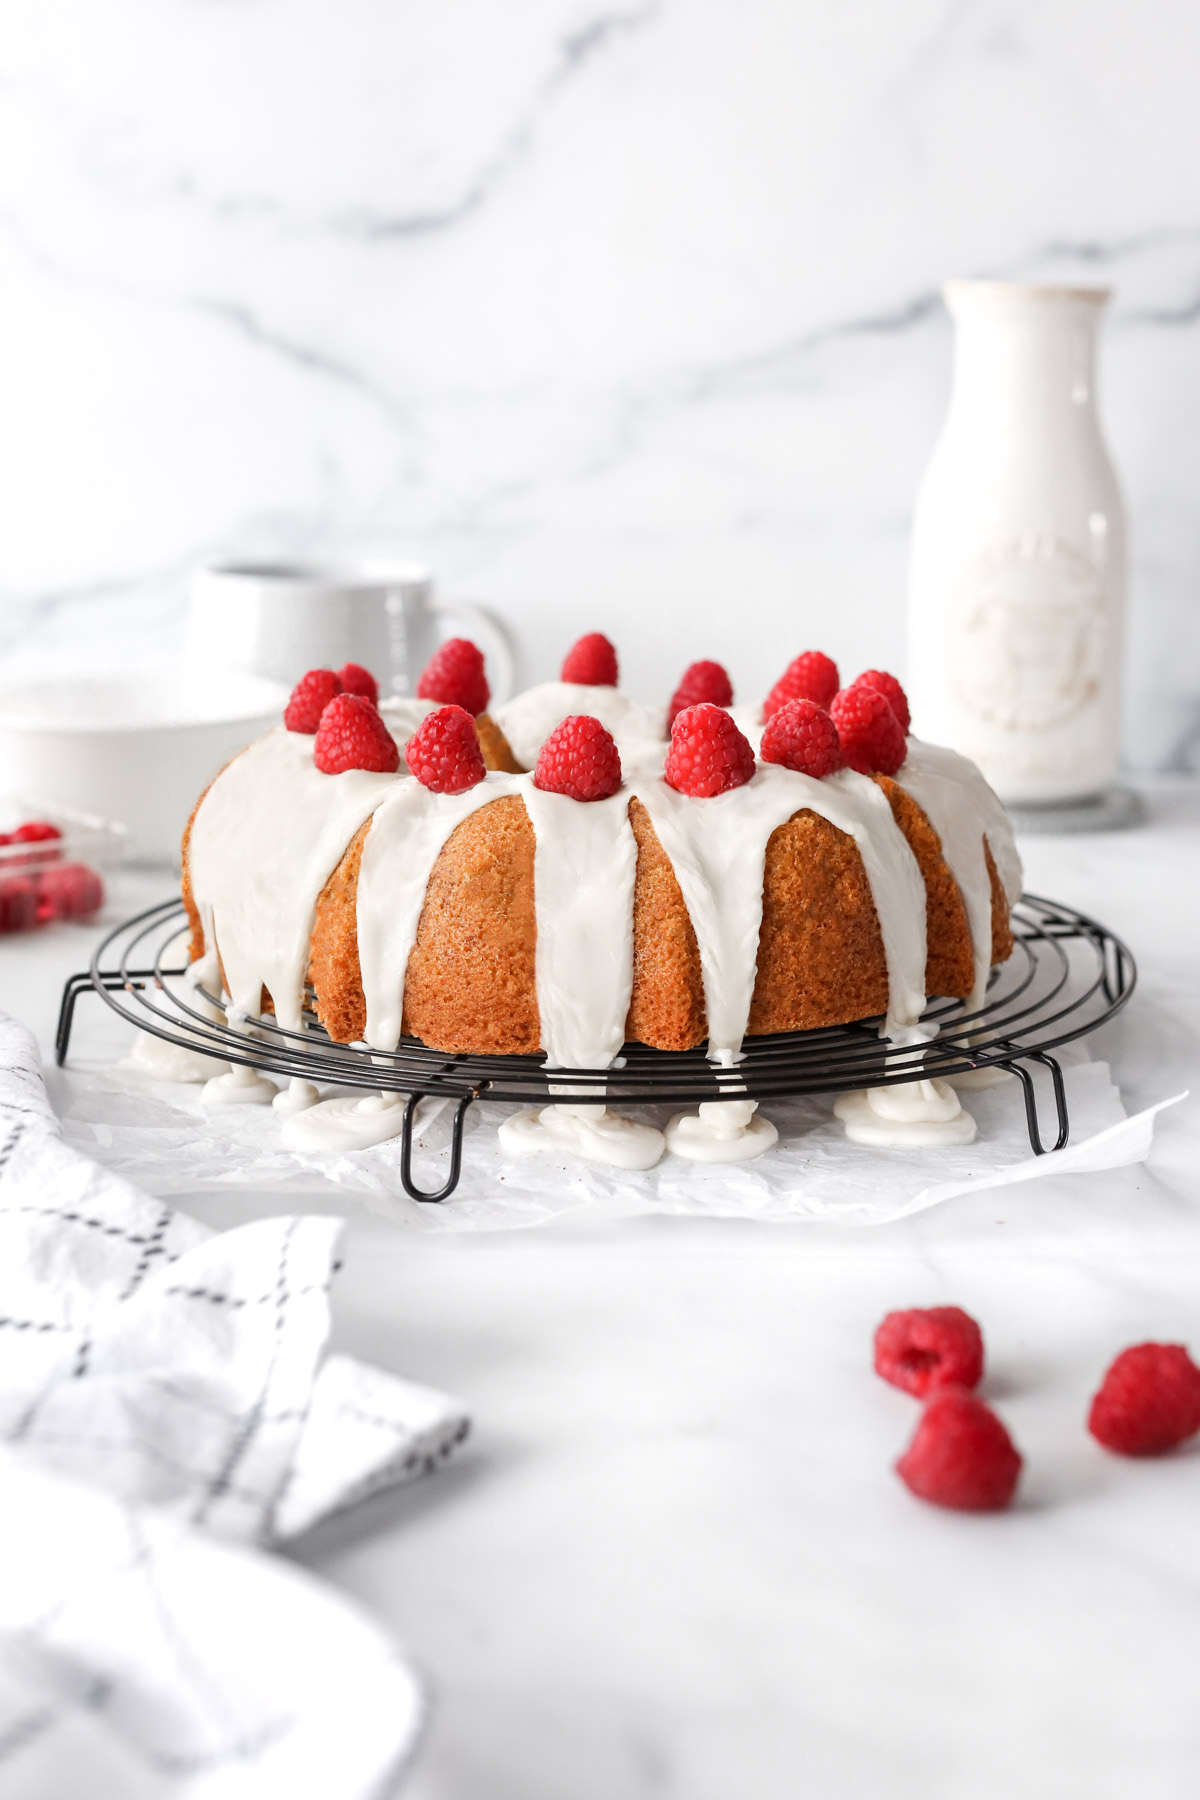 the finished raspberry white chocolate bundt cake with the ganache and fresh raspberries on top.